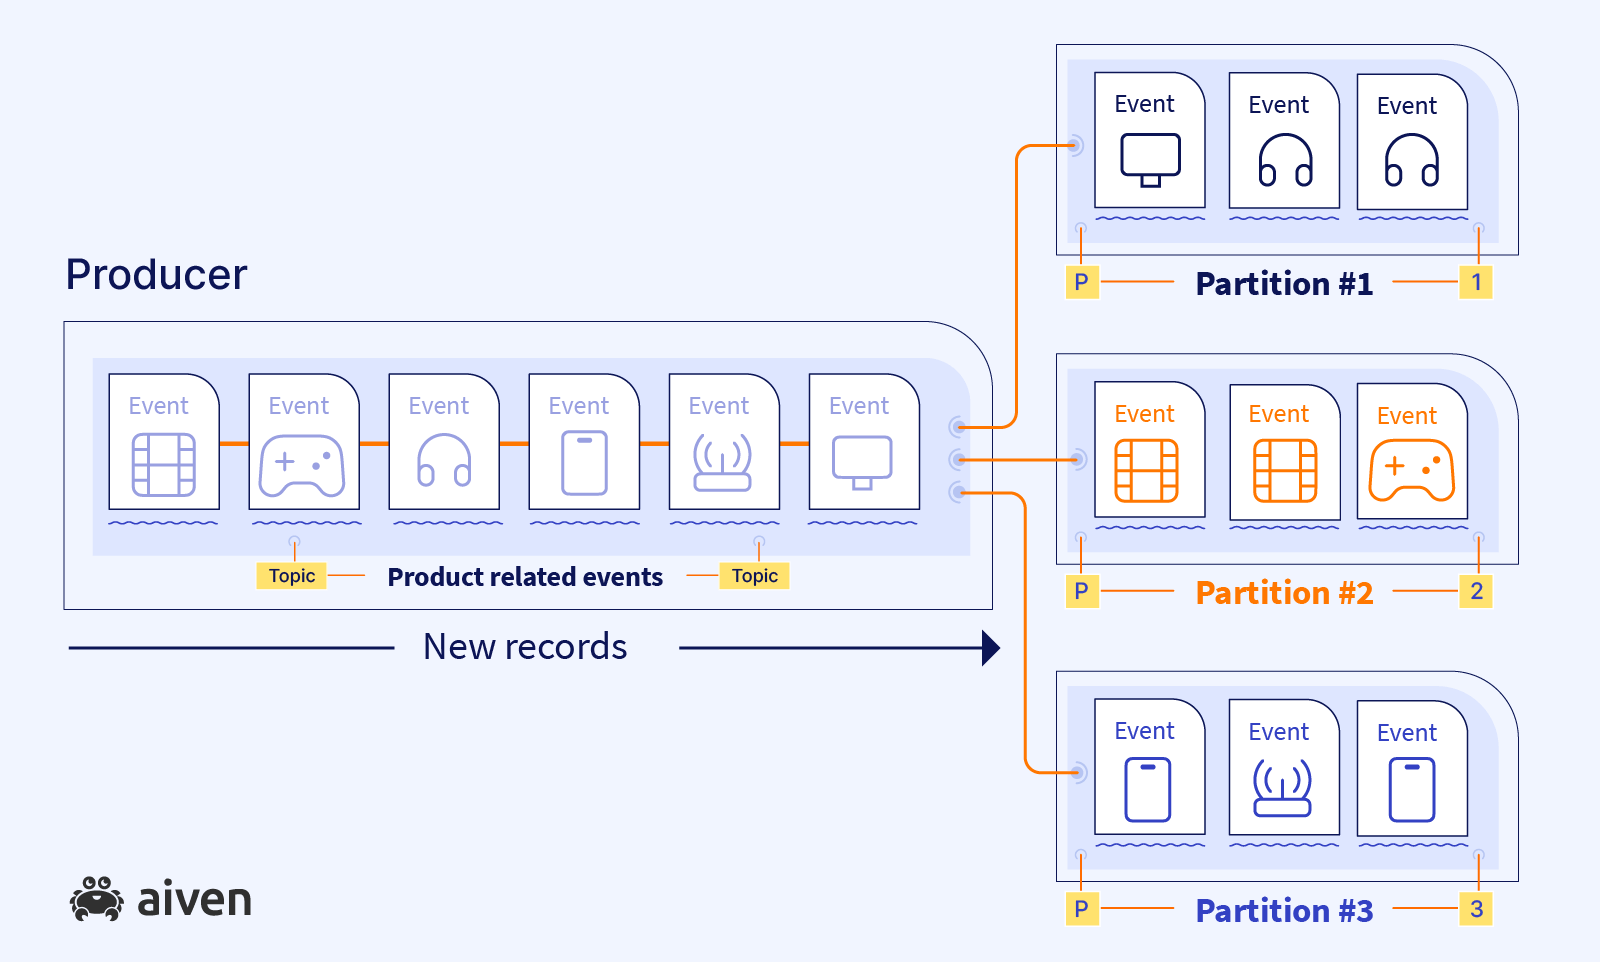 A producer is sending Product related events, which get split up into 3 different partitions. Events for TVs and headphones are in partition 1, those for film and video game items in partition 2, and phones and wifi stations are in partition 3.